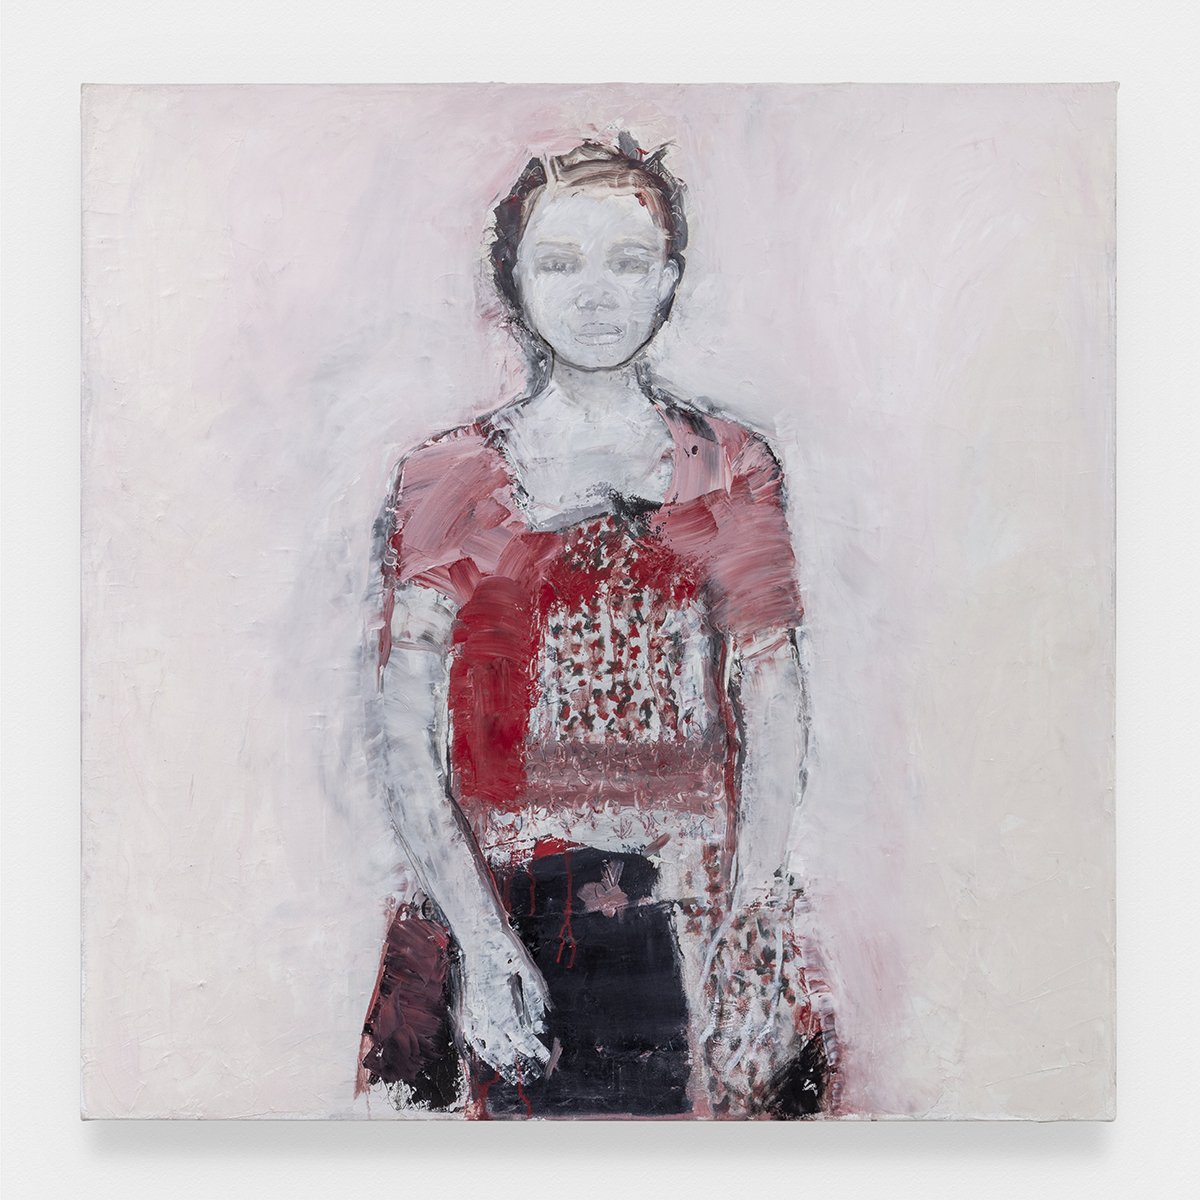  Linda Stojak  Untitled: Printed Dress , 2021 Oil on canvas 32h x 32w inches courtesy the artist and Lowell Ryan Projects 